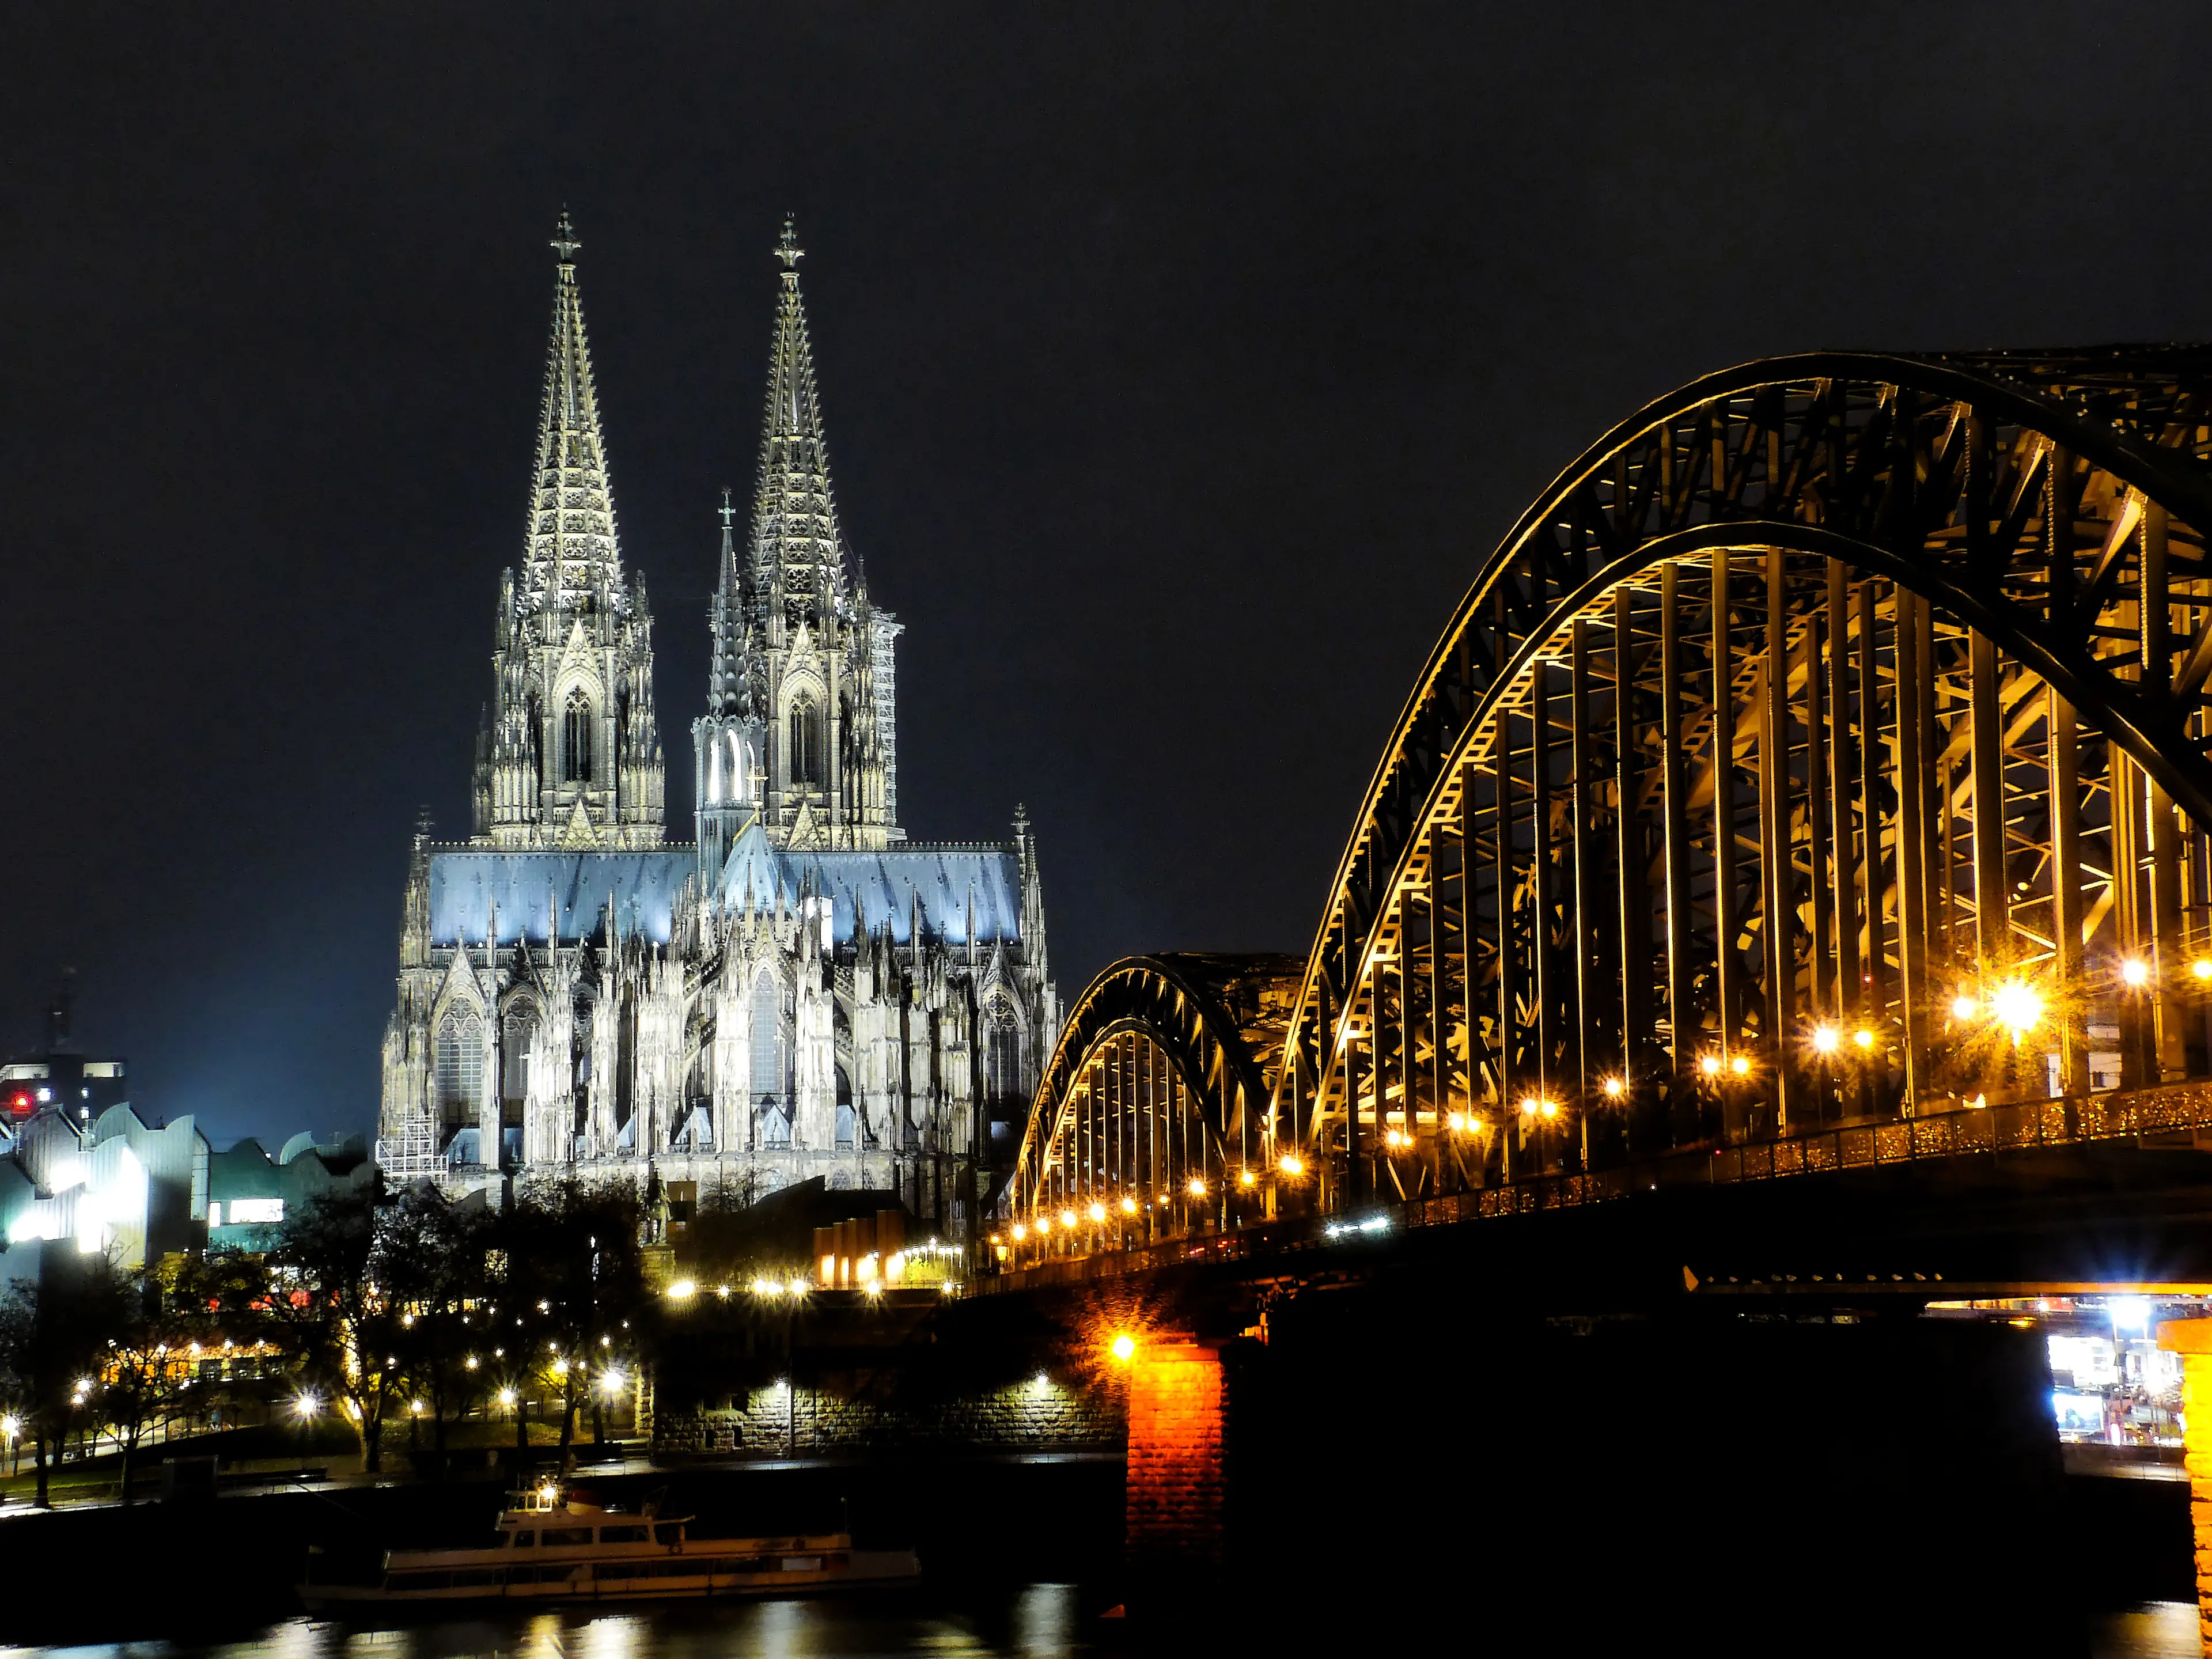 5-Day Magical Christmas Holiday Itinerary in Cologne, Germany